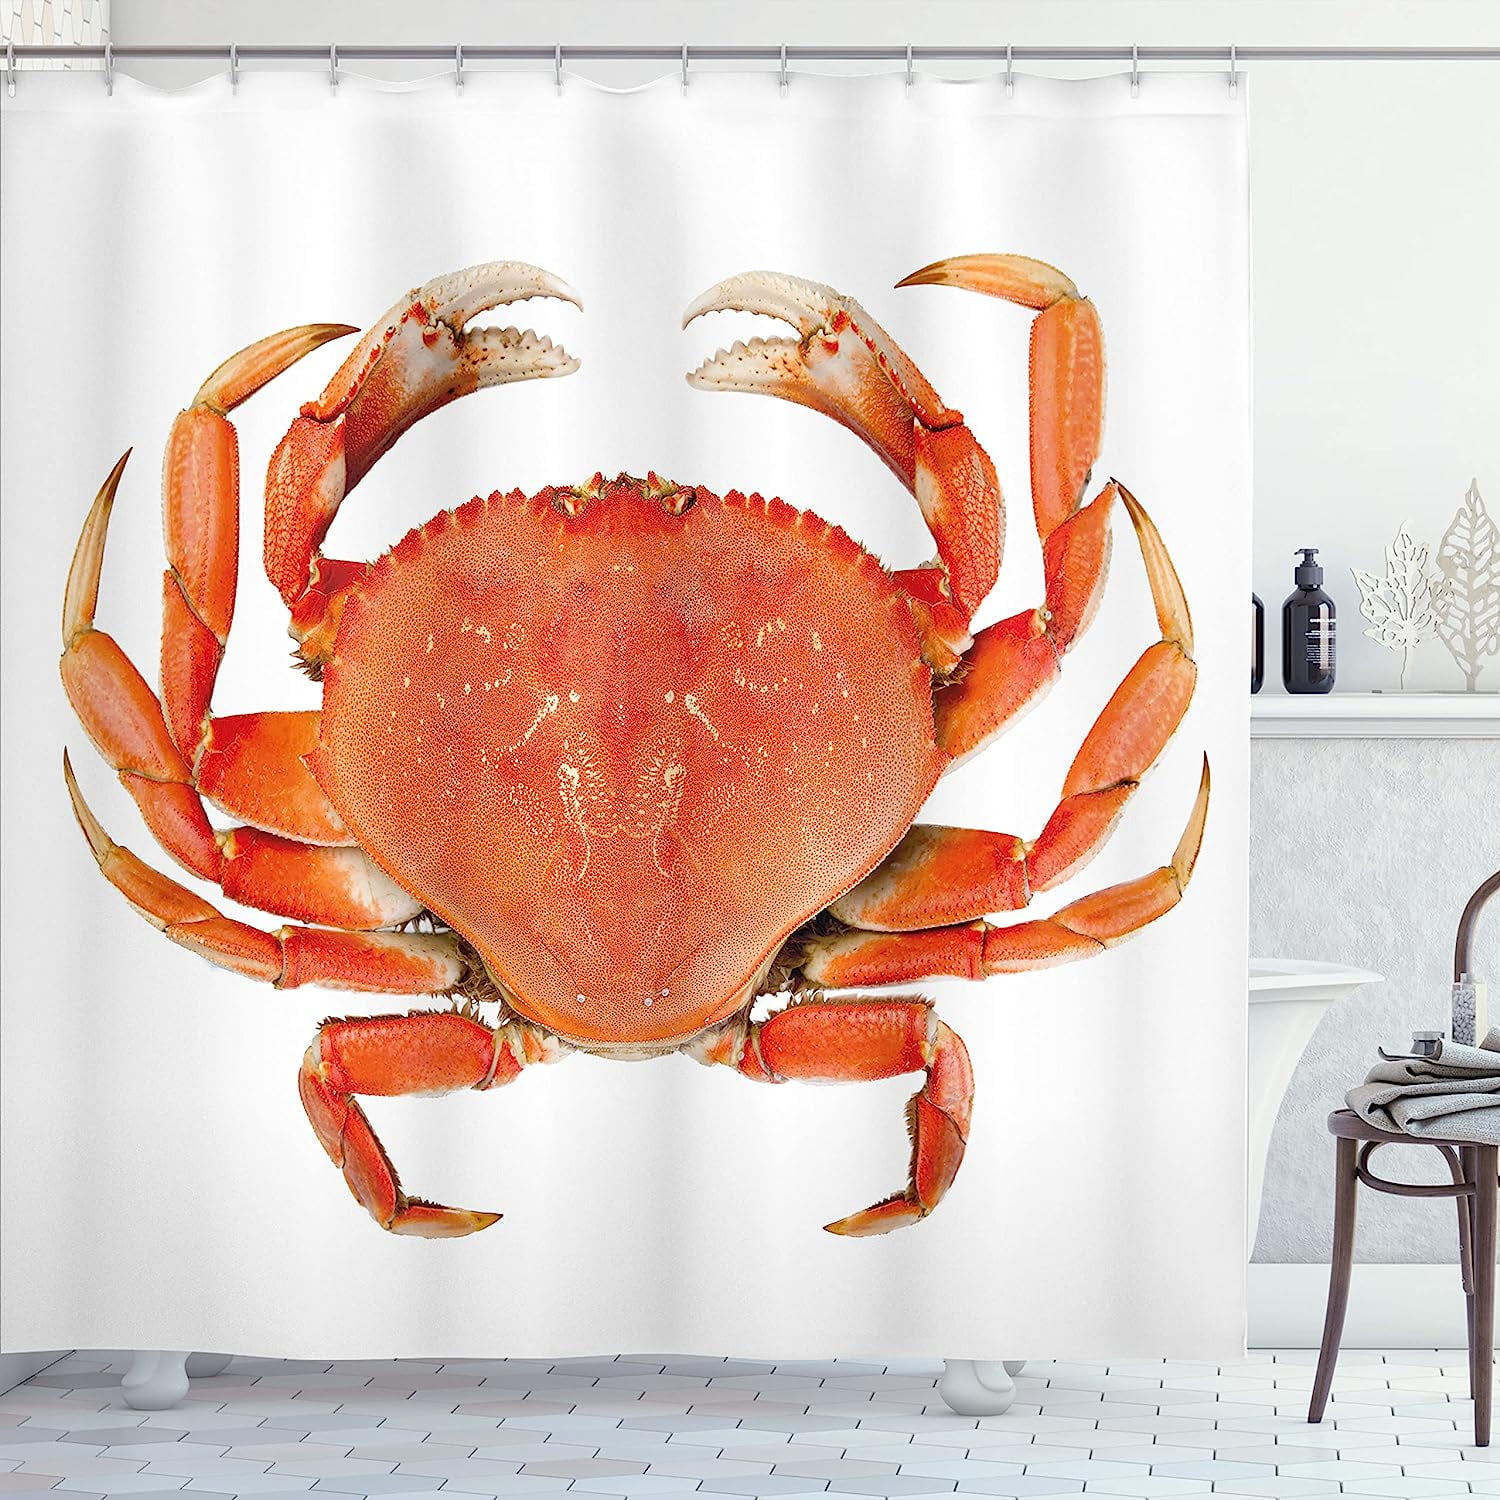 JOOCAR Crabs Shower Curtain, Sea Animals Theme a Cooked Dungeness Crab  National Marks Digital Image Print, Cloth Fabric Bathroom Decor Set with  Hooks, 72x72 inch, Orange White 